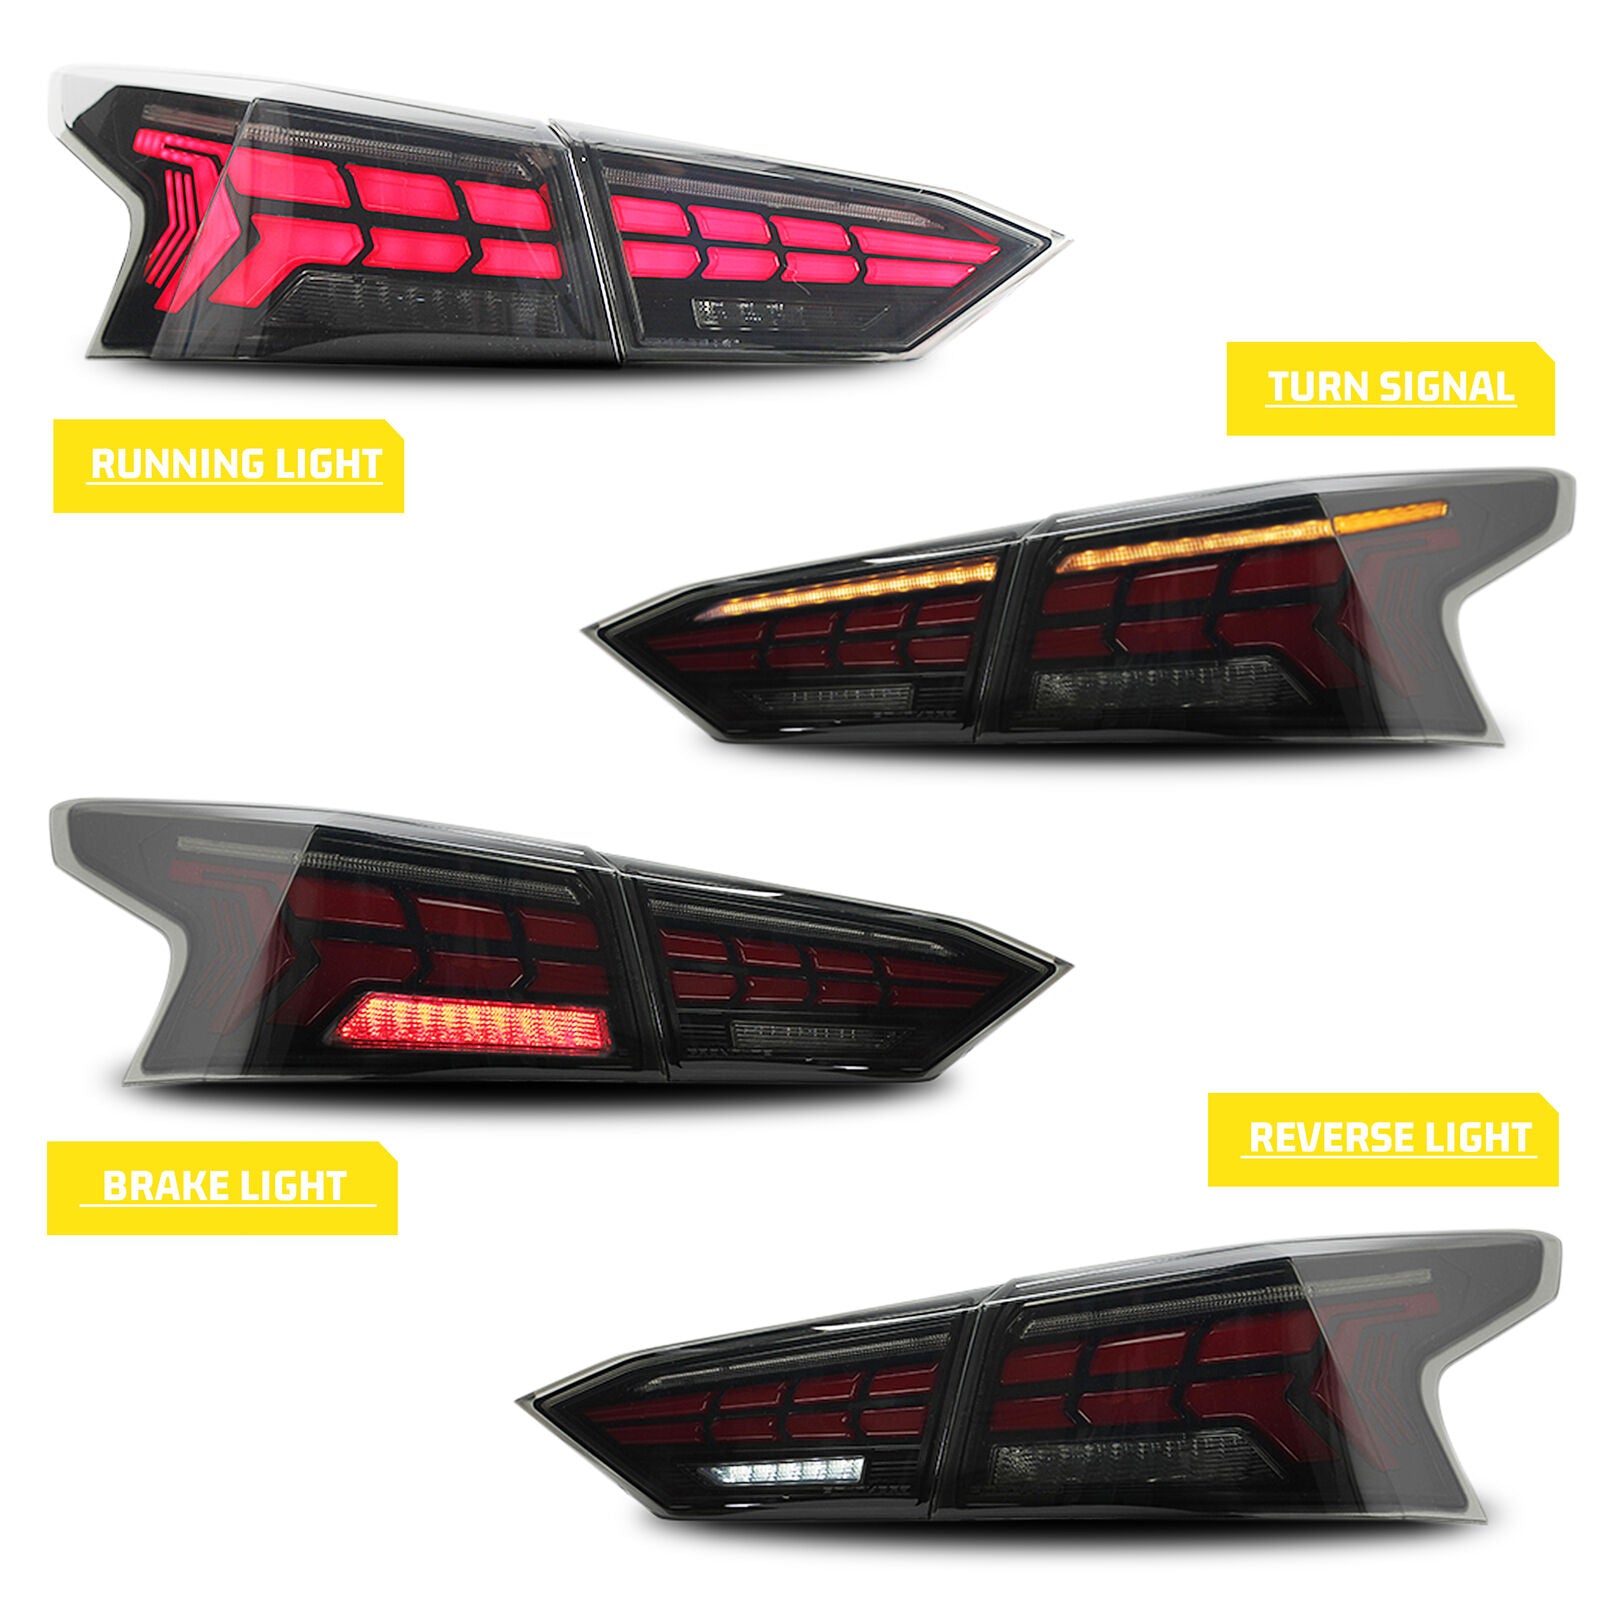 inginuity time LED Tail Lights for Nissan Altima 2019 2020 2021